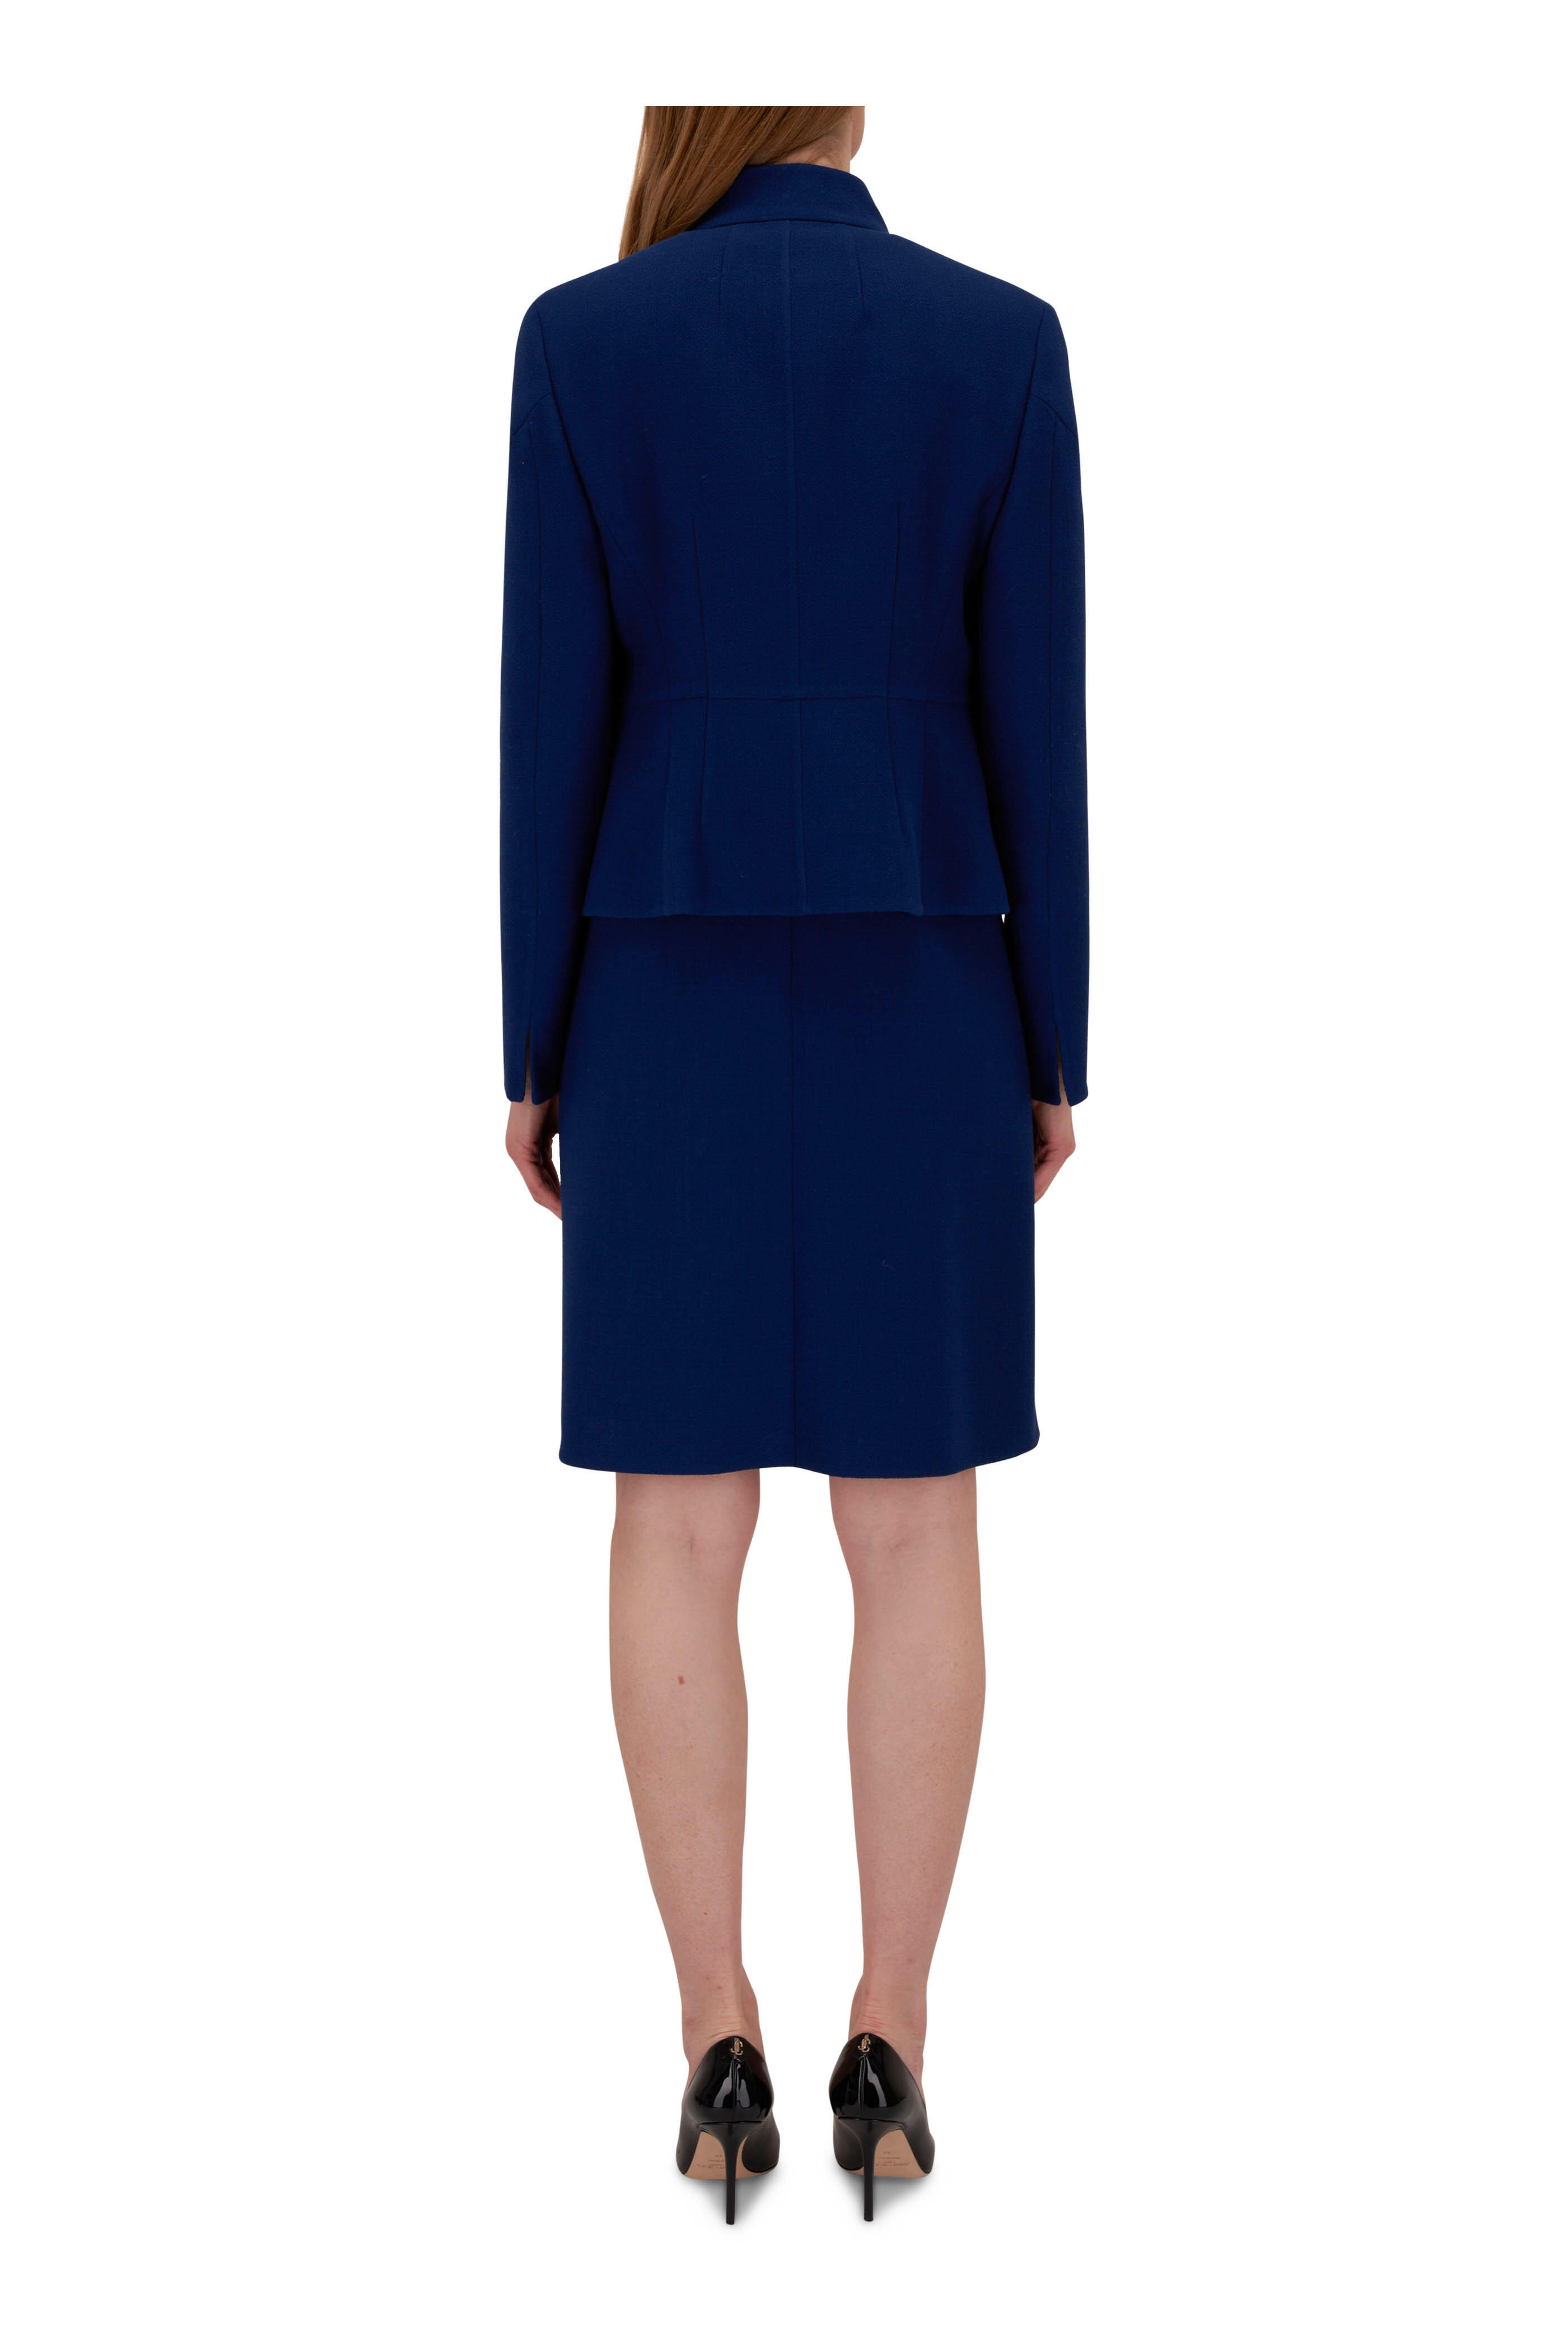 Akris Double Face Wool Crepe Dress, $1,990, Nordstrom